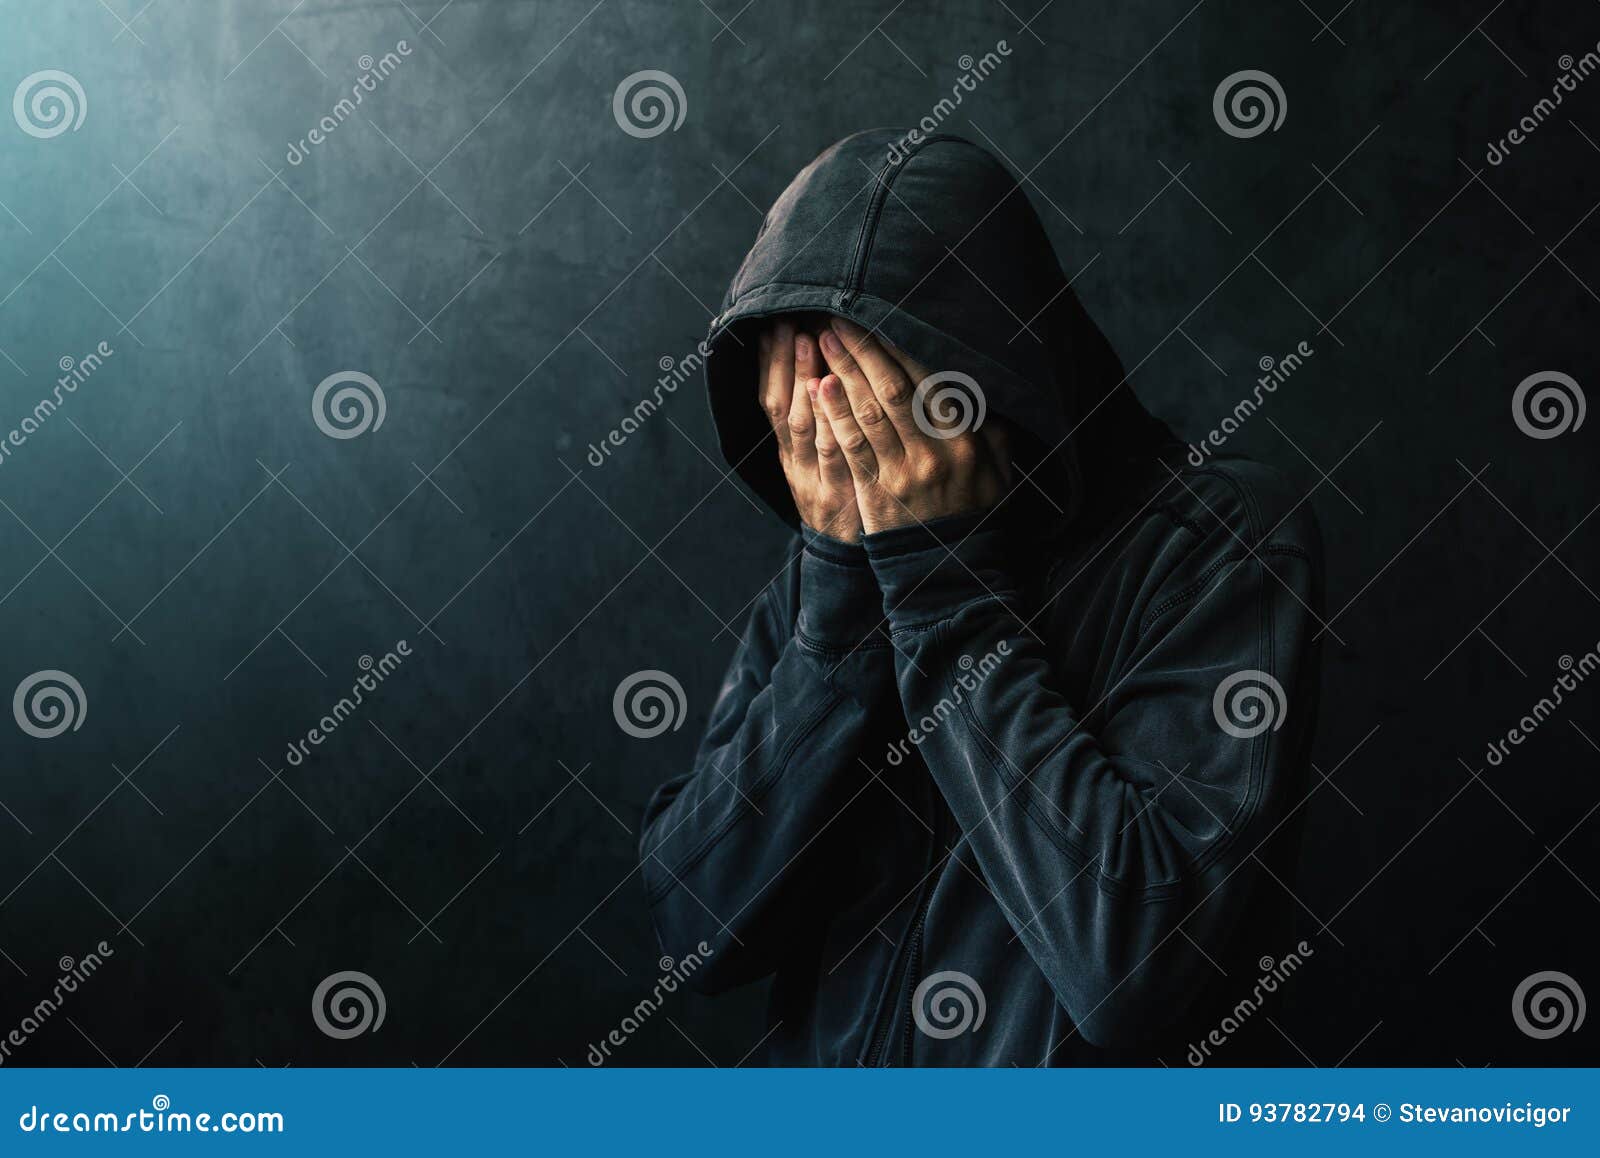 desperate man in hooded jacket is crying